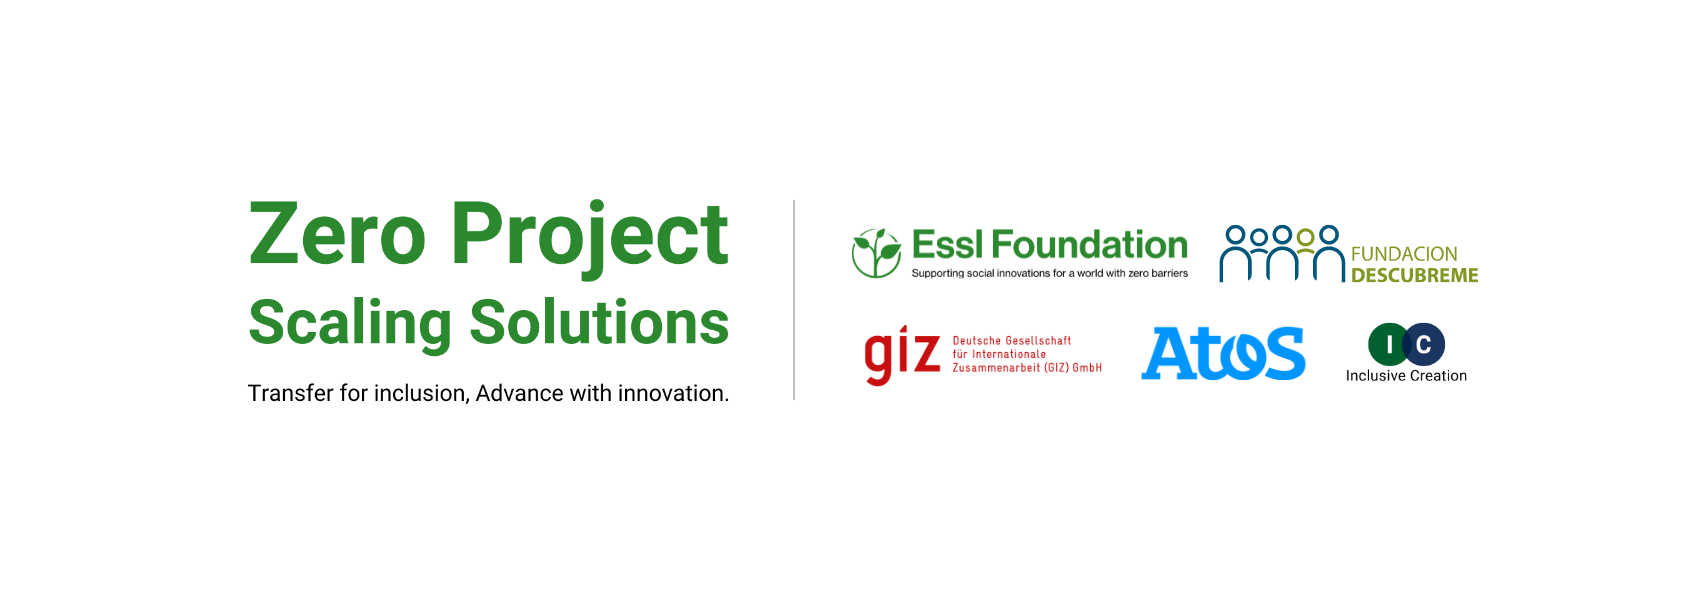 Zero Project Icon next to text reading "Zero Project Scaling Solutions by Essl Foundation, Fundacion Descubreme, GIZ, Atos, and Inclusive Creation"; all in the Zero Project's dark green on white background